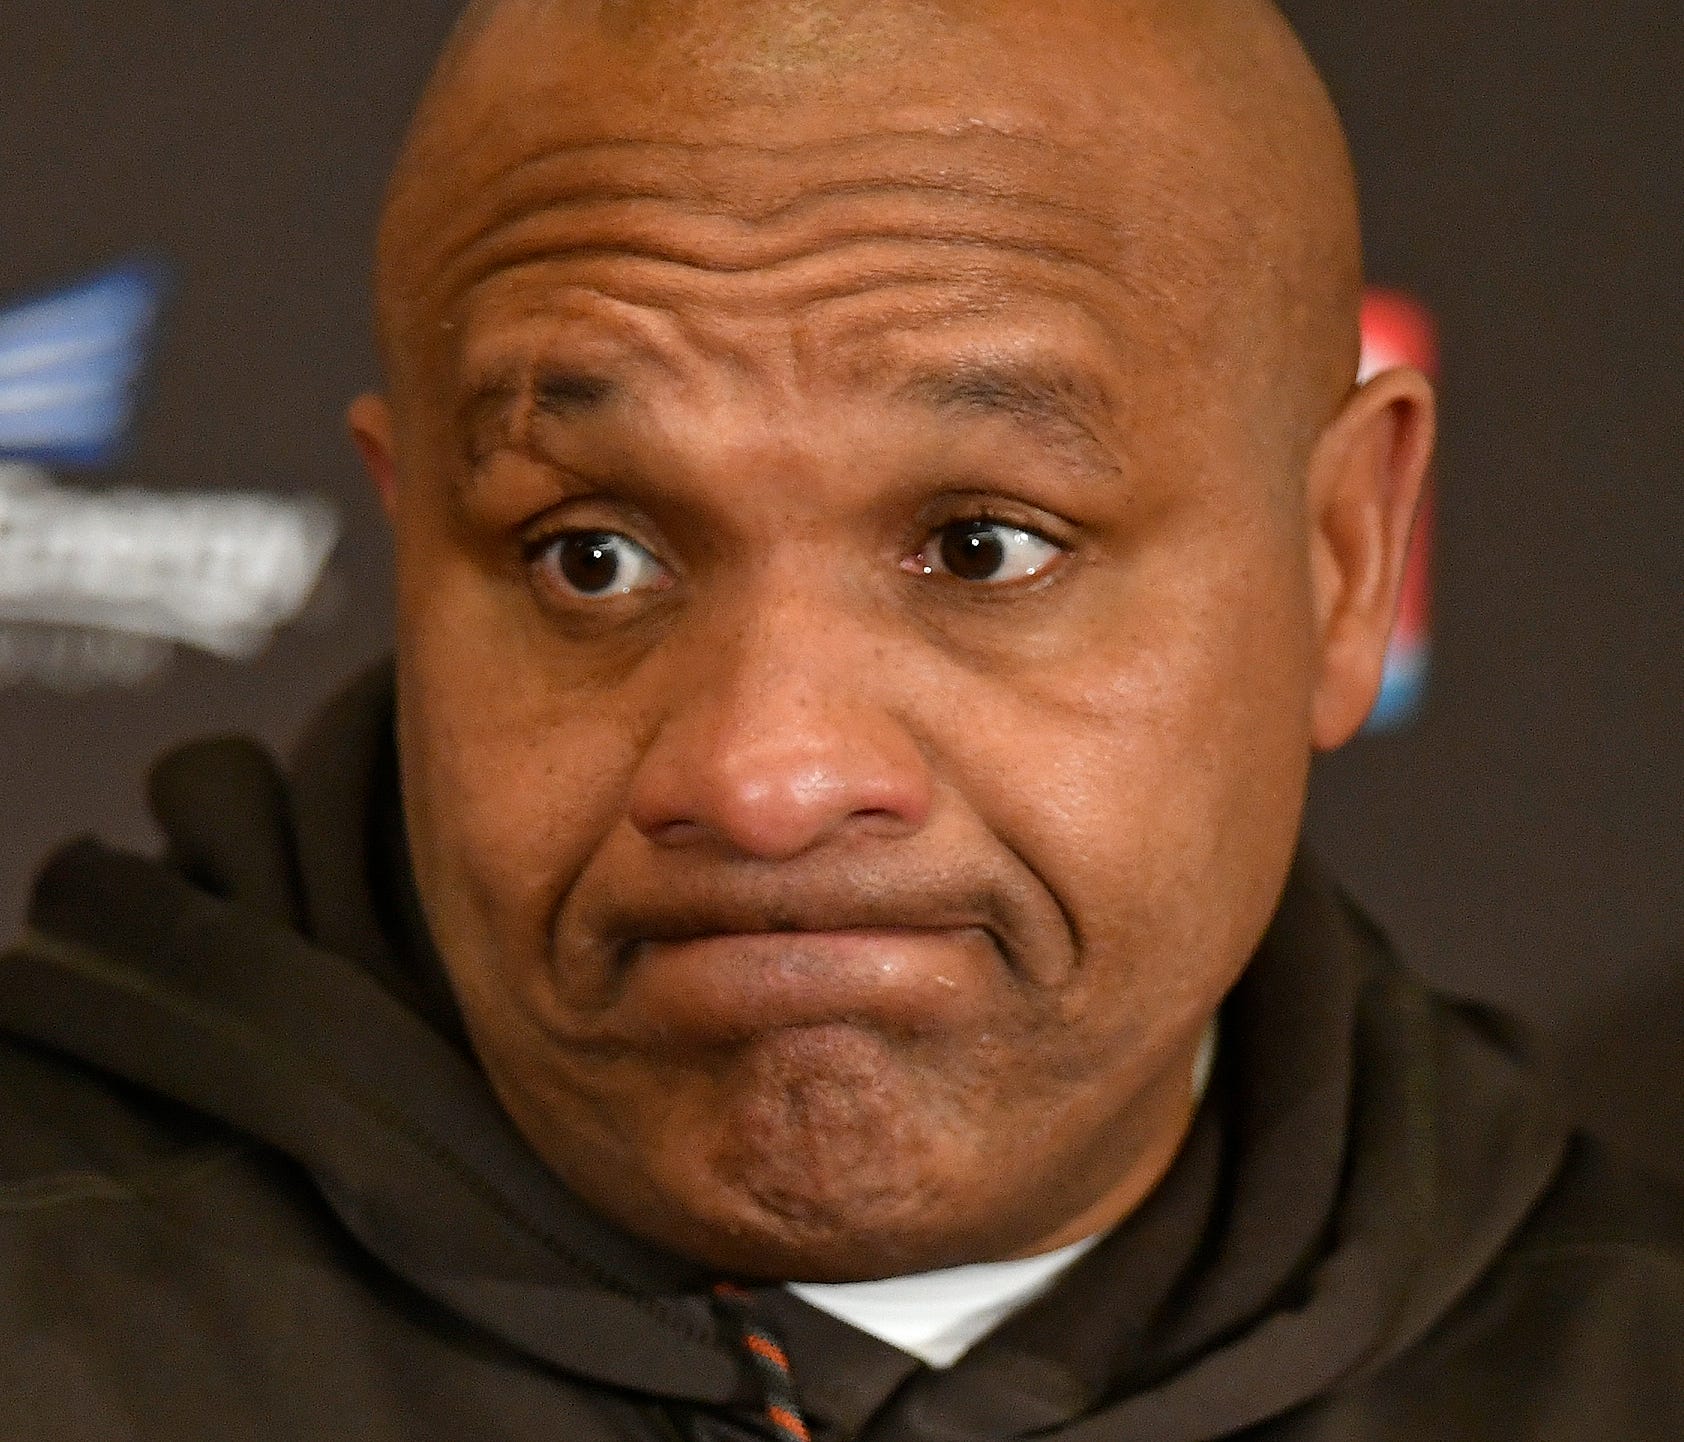 Cleveland Browns head coach Hue Jackson answers questions during a news conference after the Baltimore Ravens defeated his team in an NFL football game, Sunday, Dec. 17, 2017, in Cleveland. (AP Photo/David Richard)